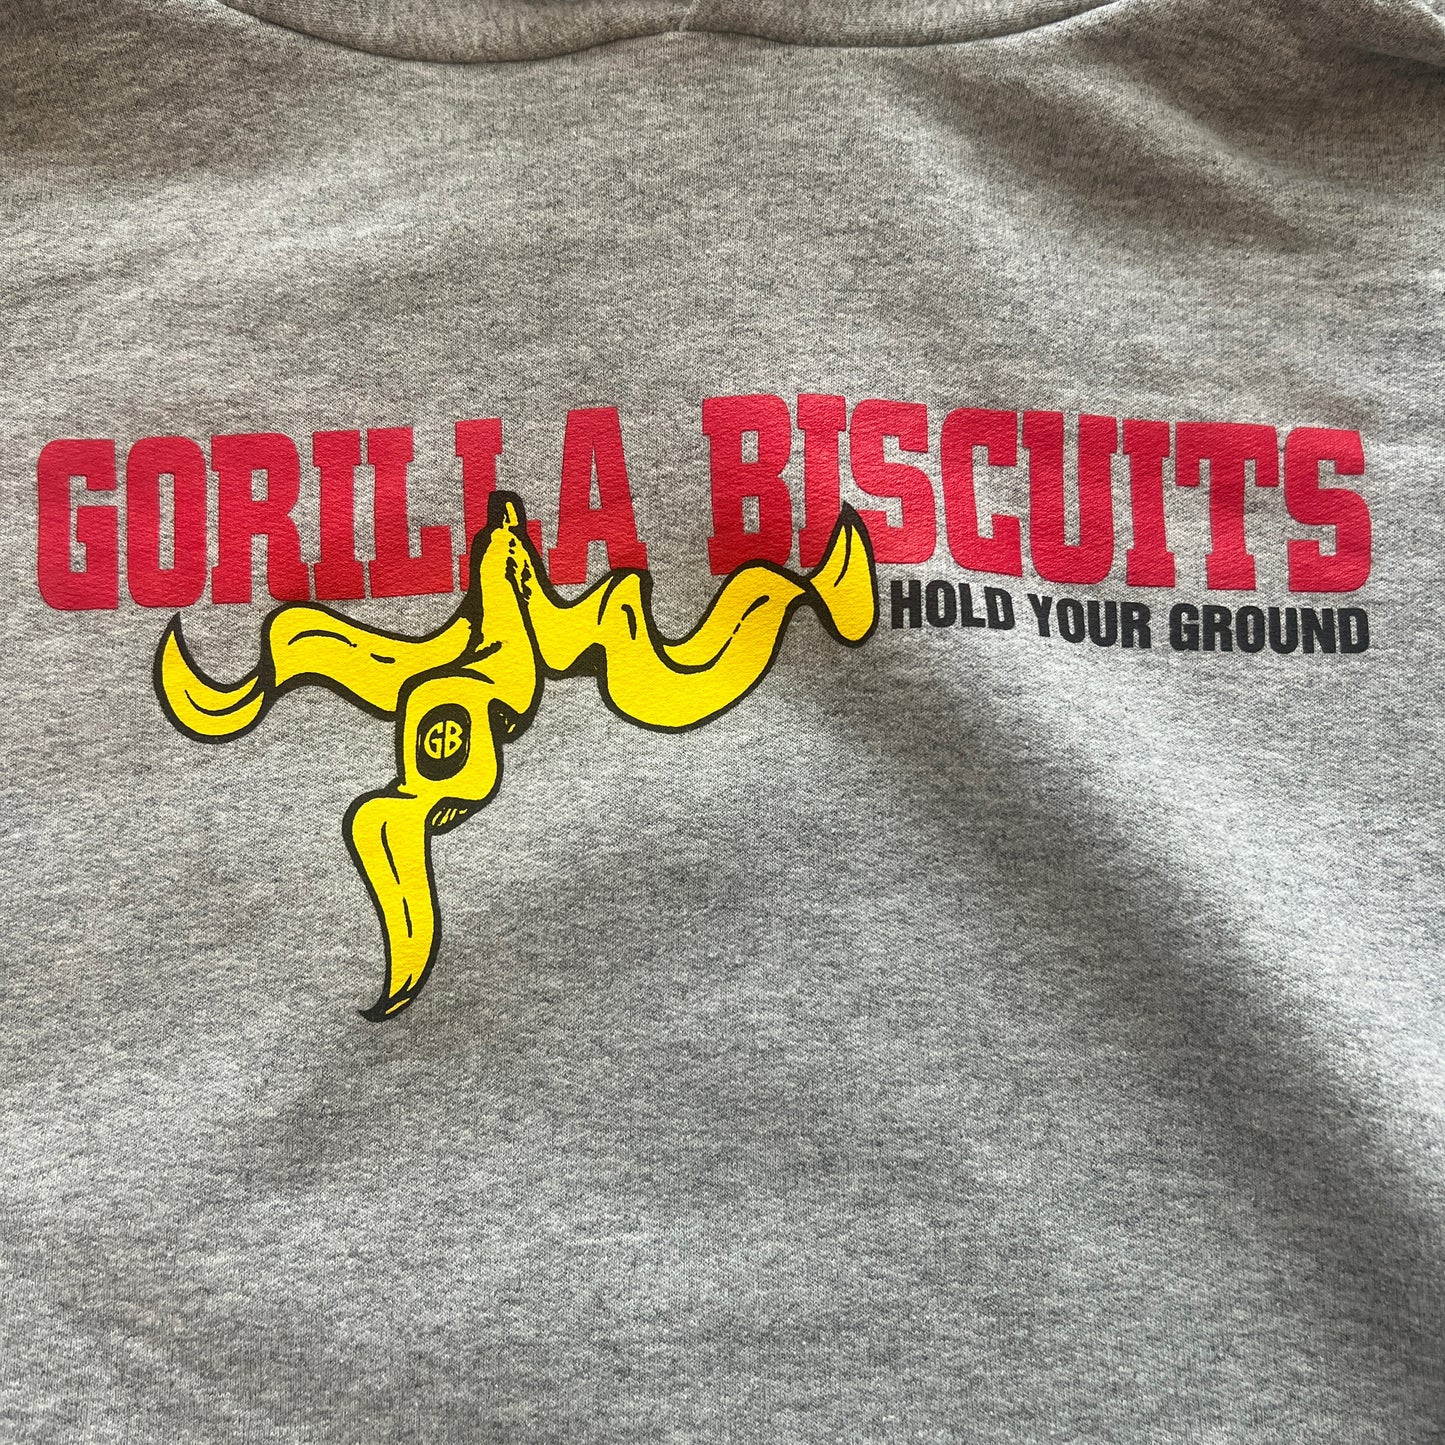 Gorilla Biscuits Band Hold Your Ground Pullover Hoodie Size XL